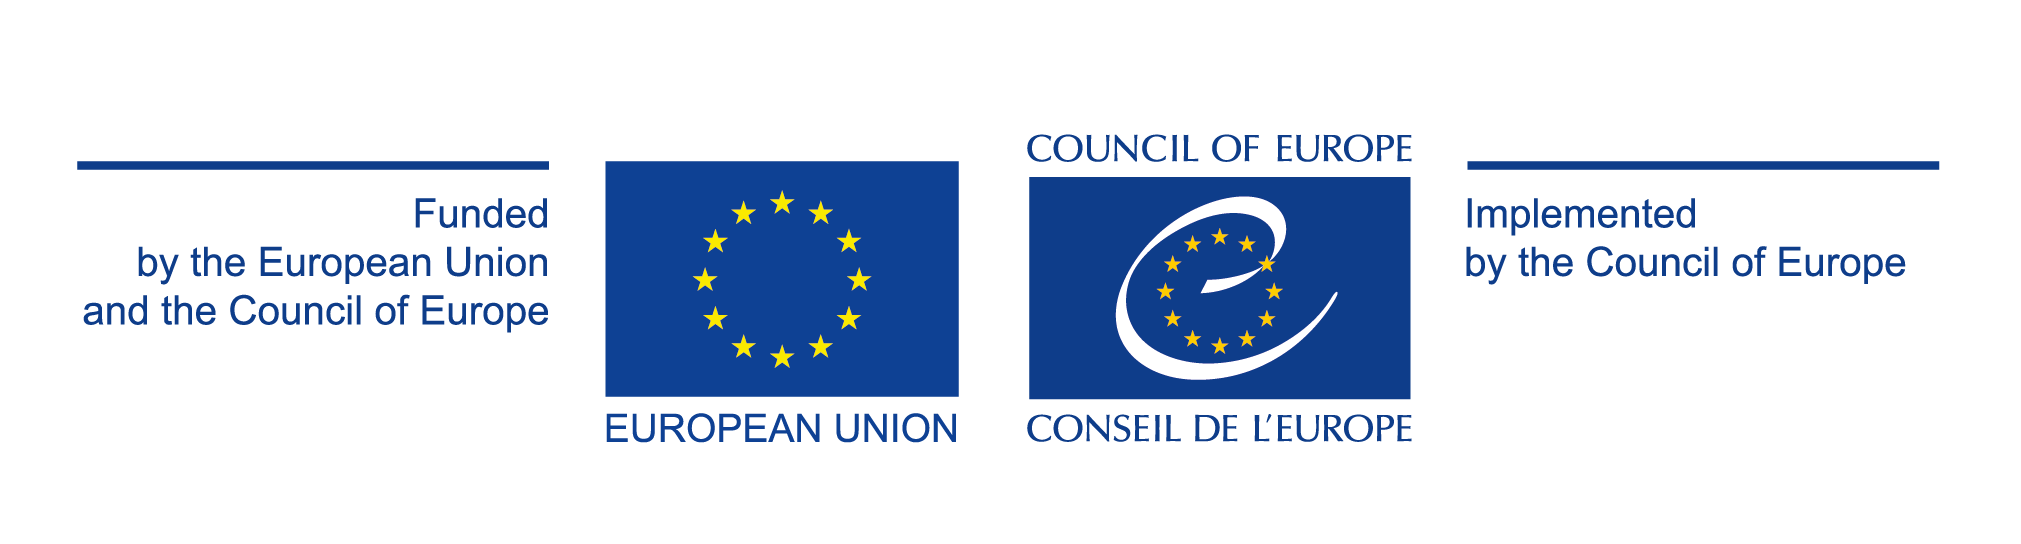 EU and CoE joint logo